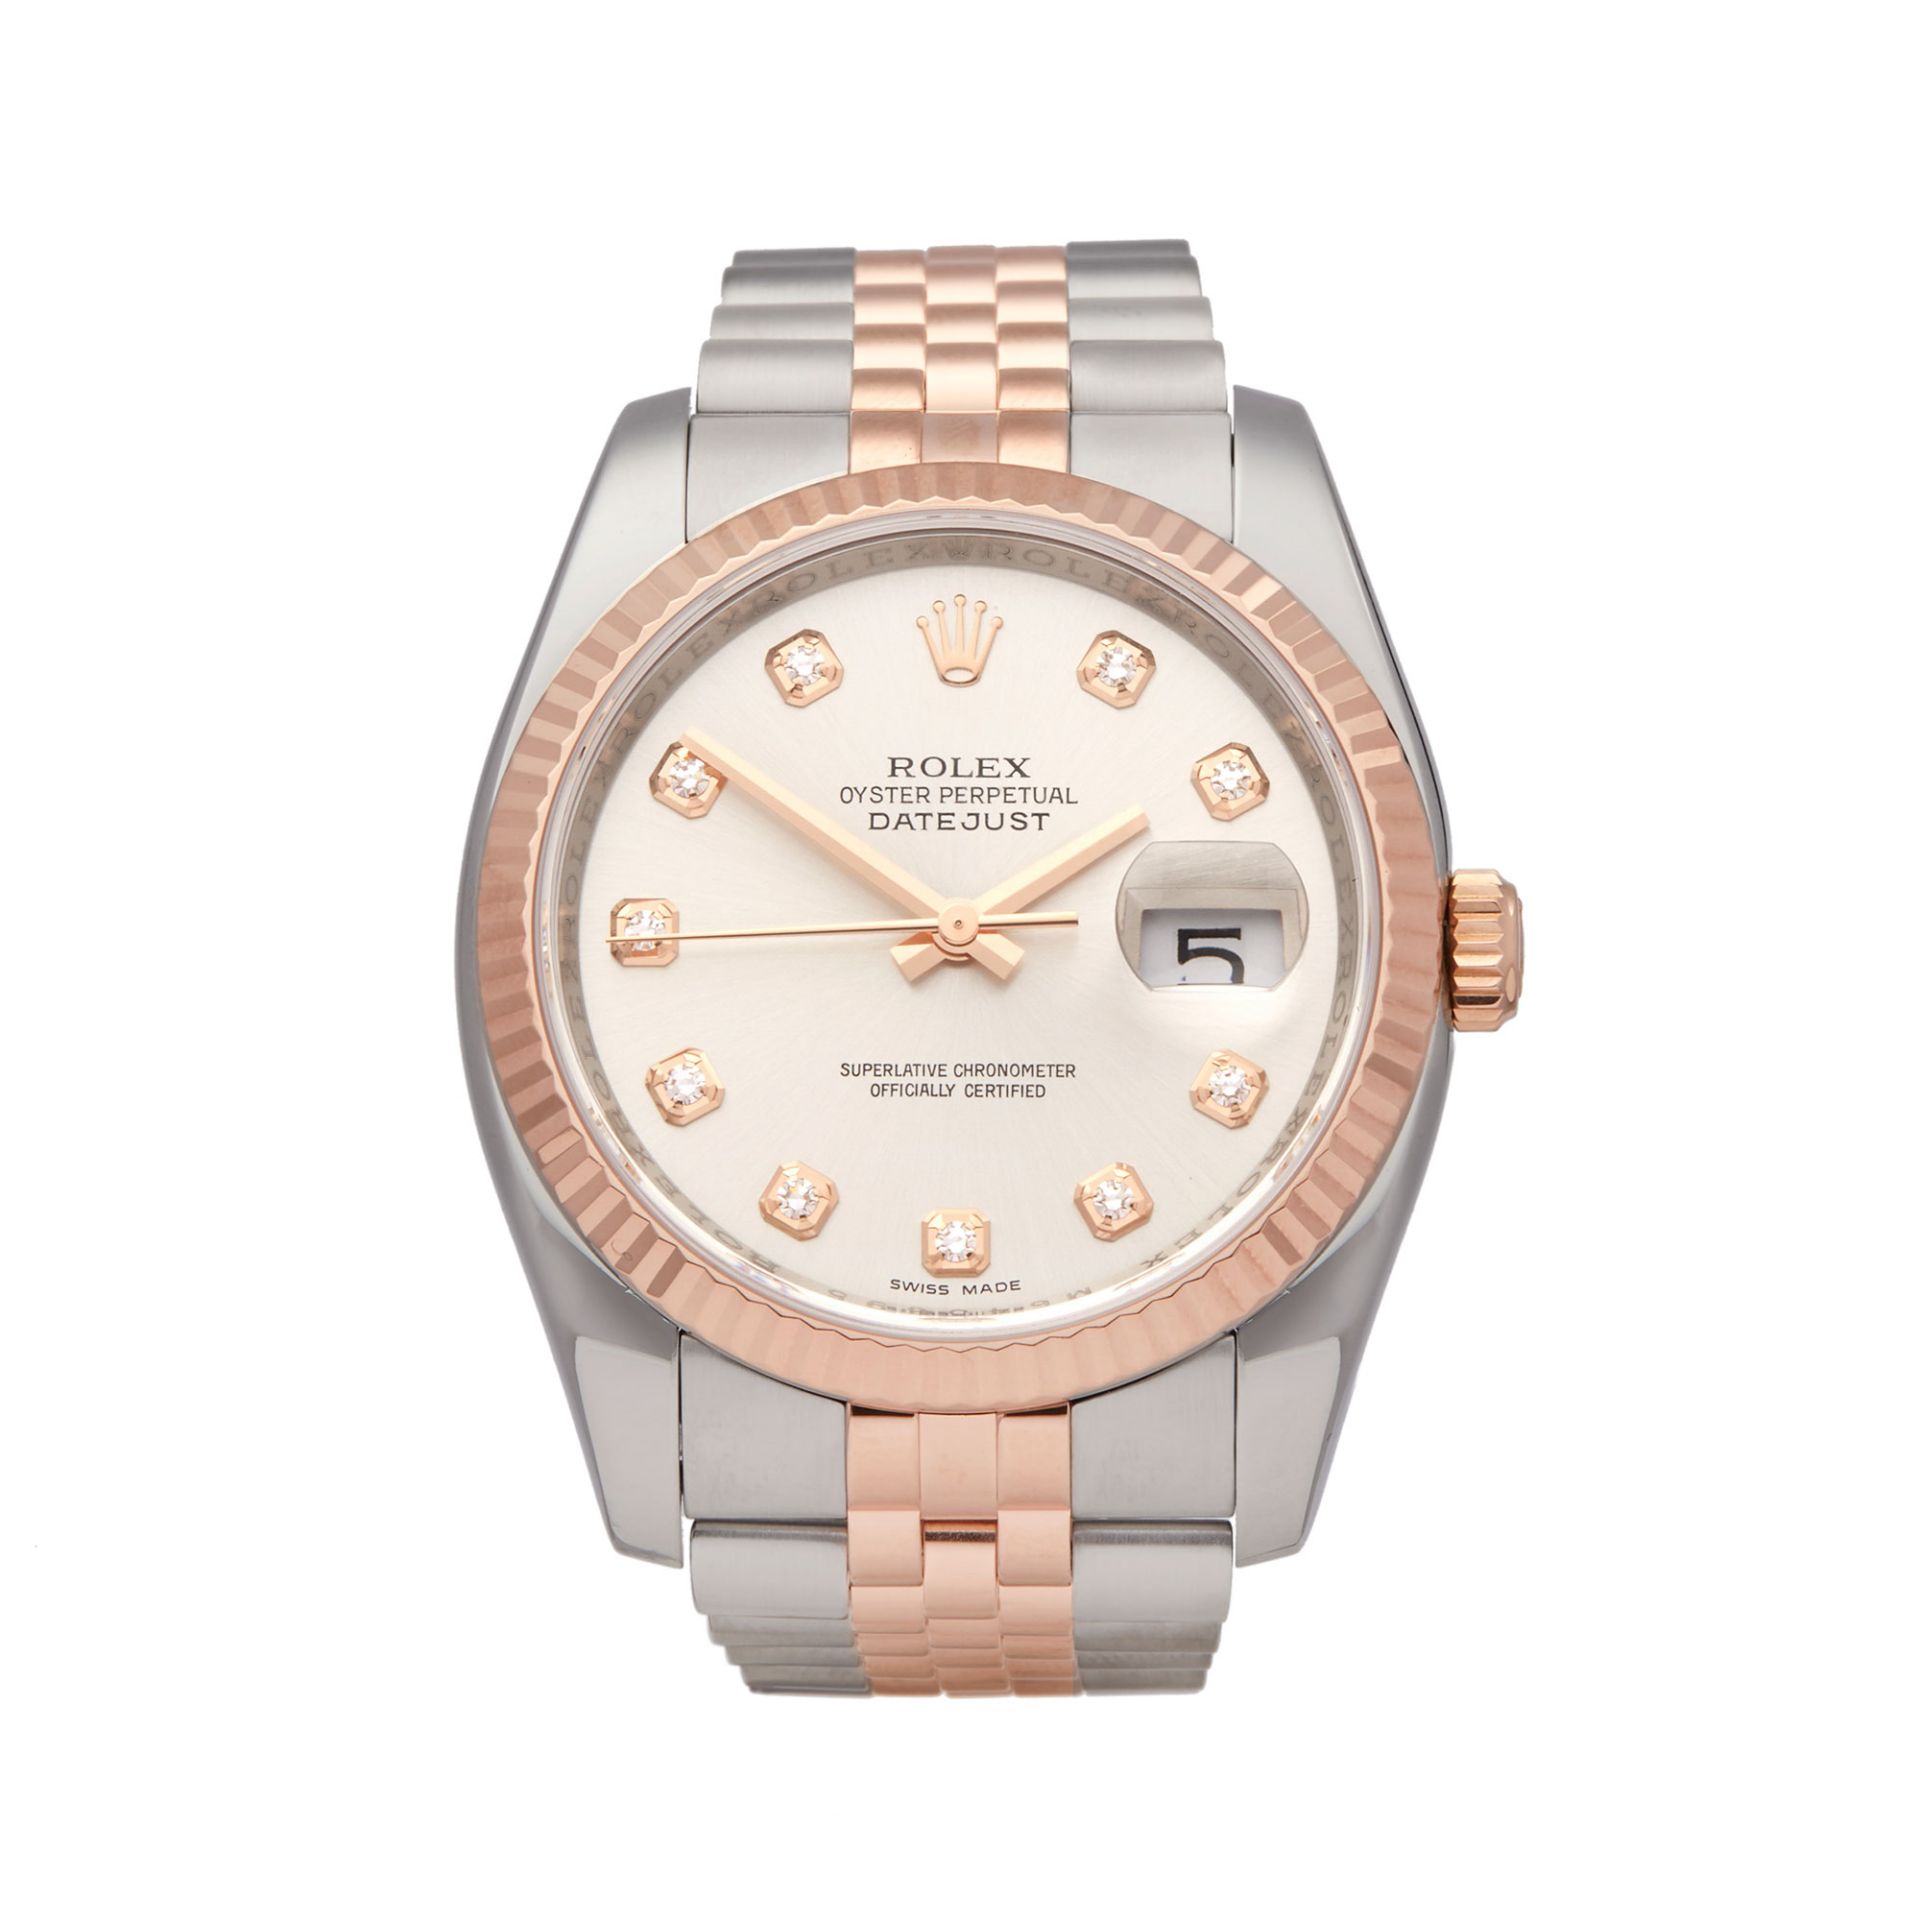 2008 DateJust 36 Diamond Stainless Steel & Rose Gold - 116231 - Image 9 of 9